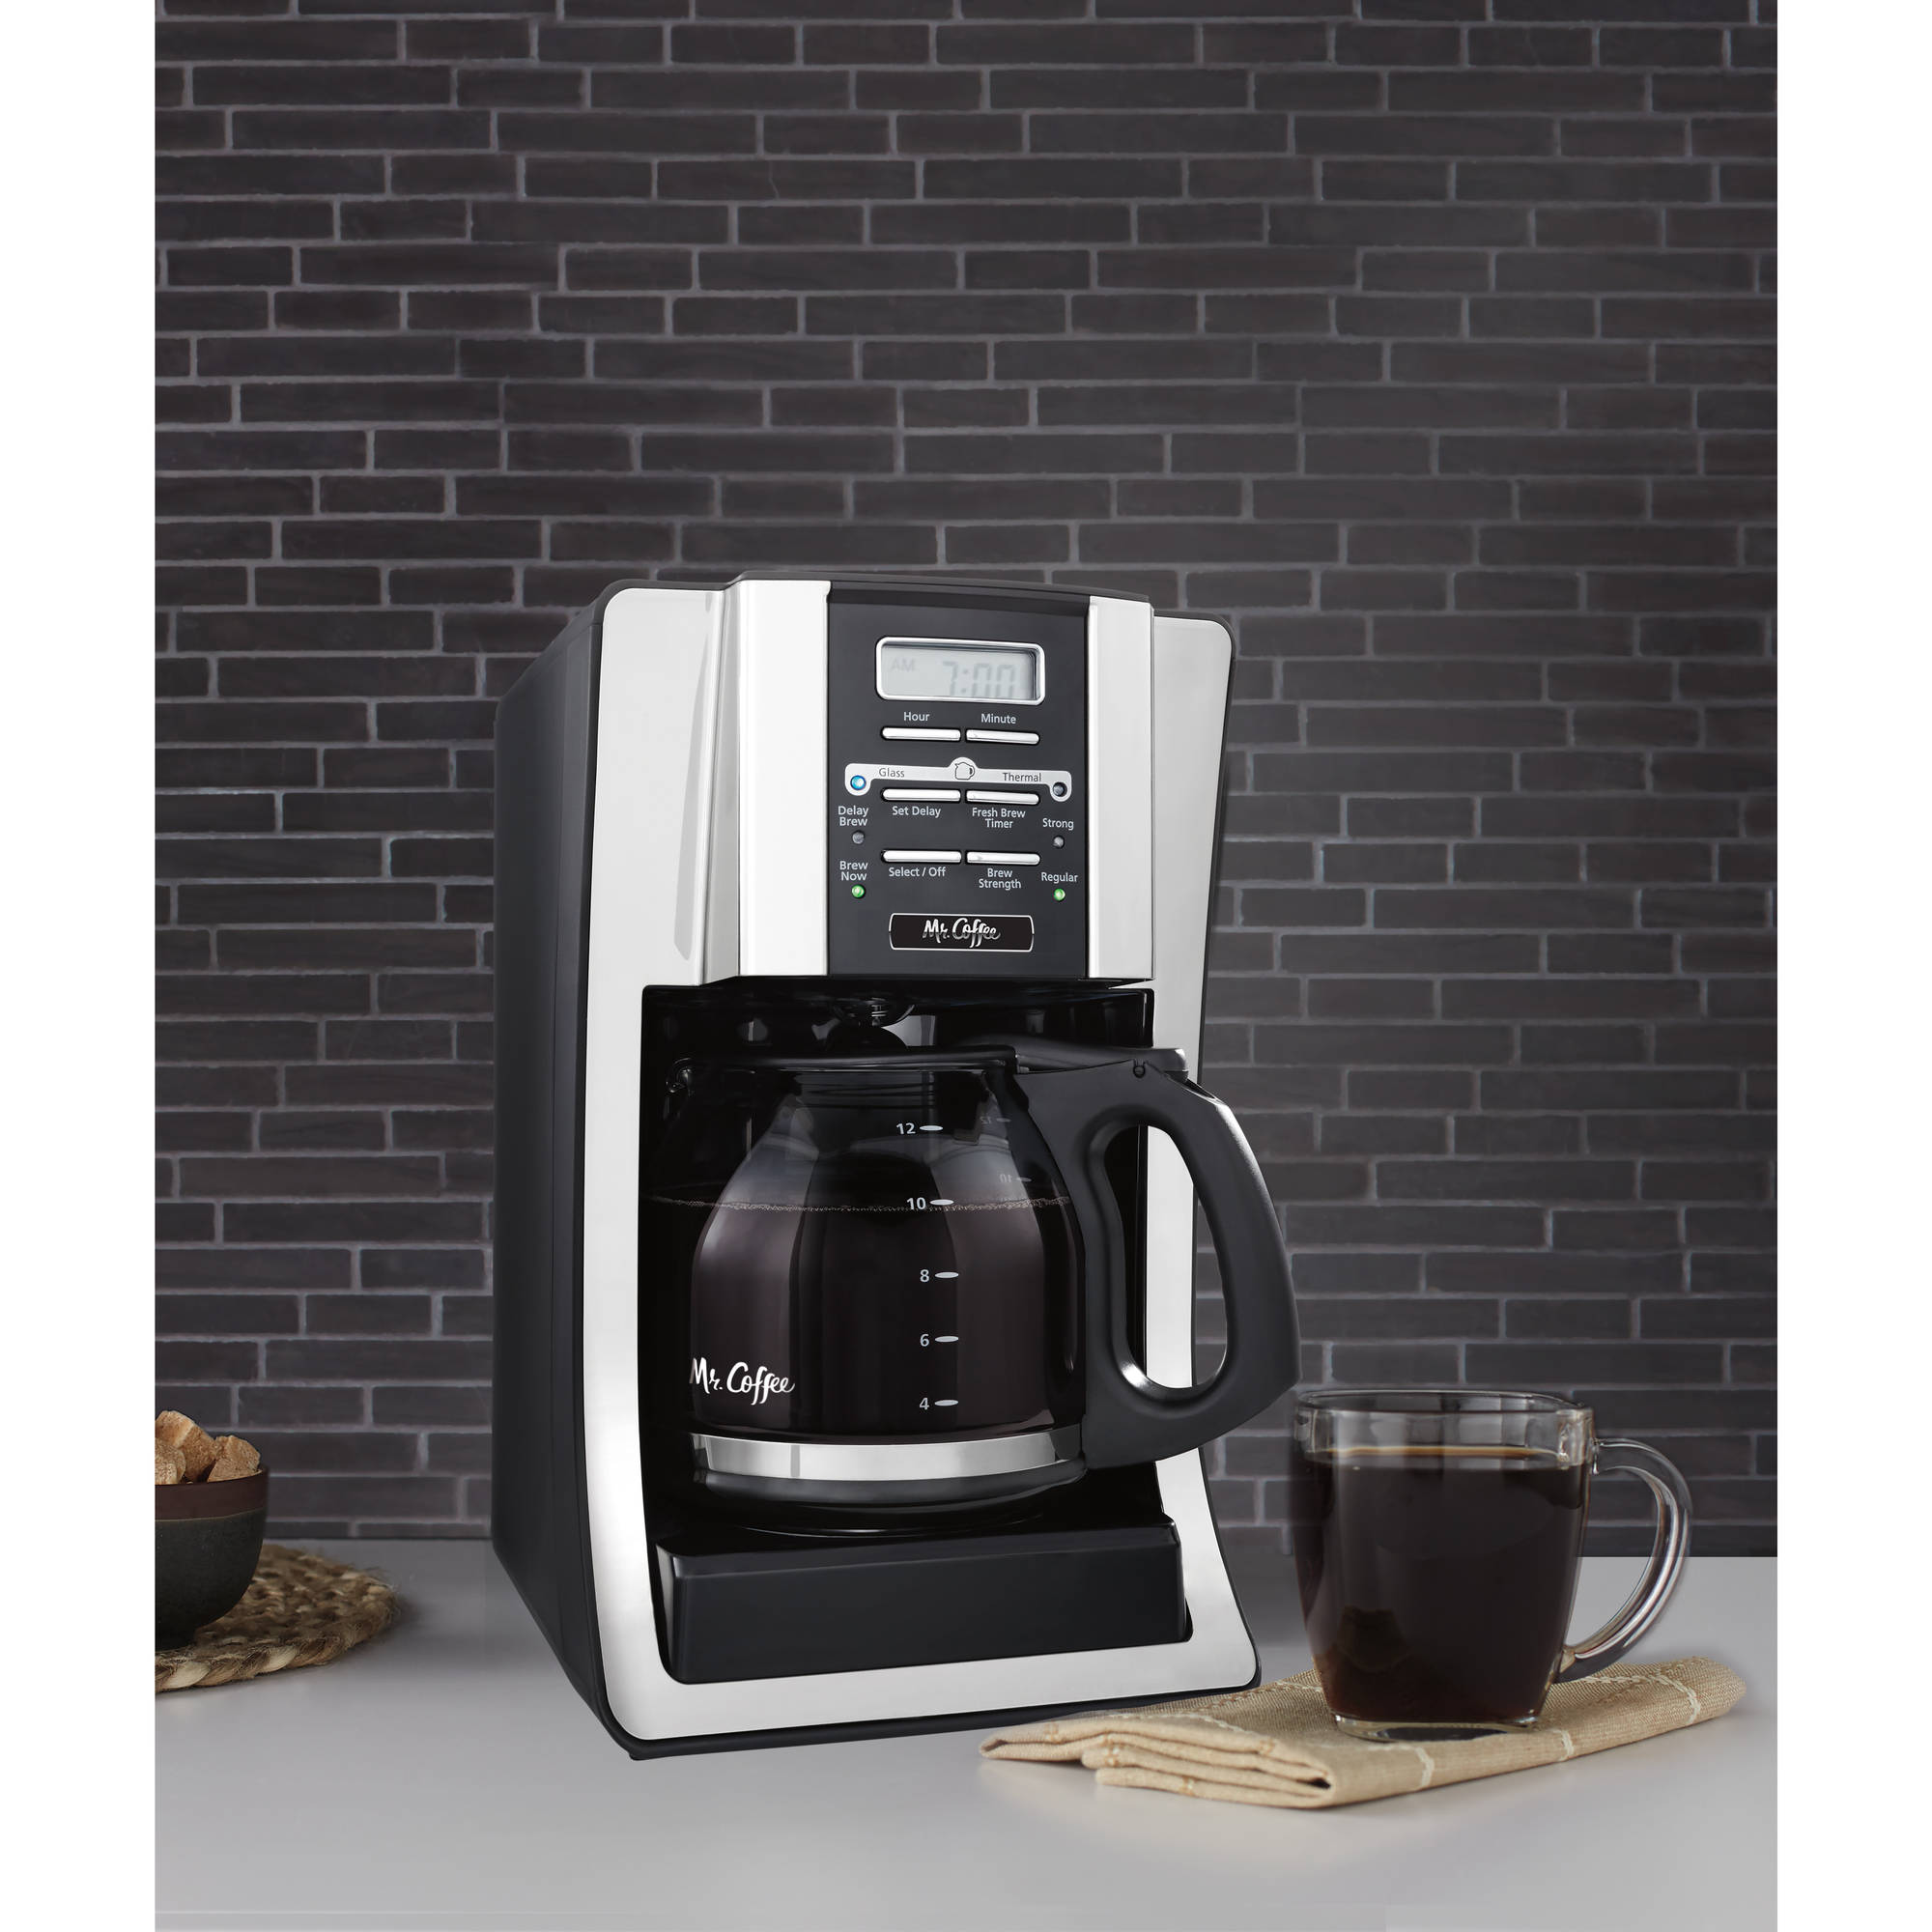 Mr. Coffee 12 Cup Programmable Black Coffee Maker - image 2 of 3